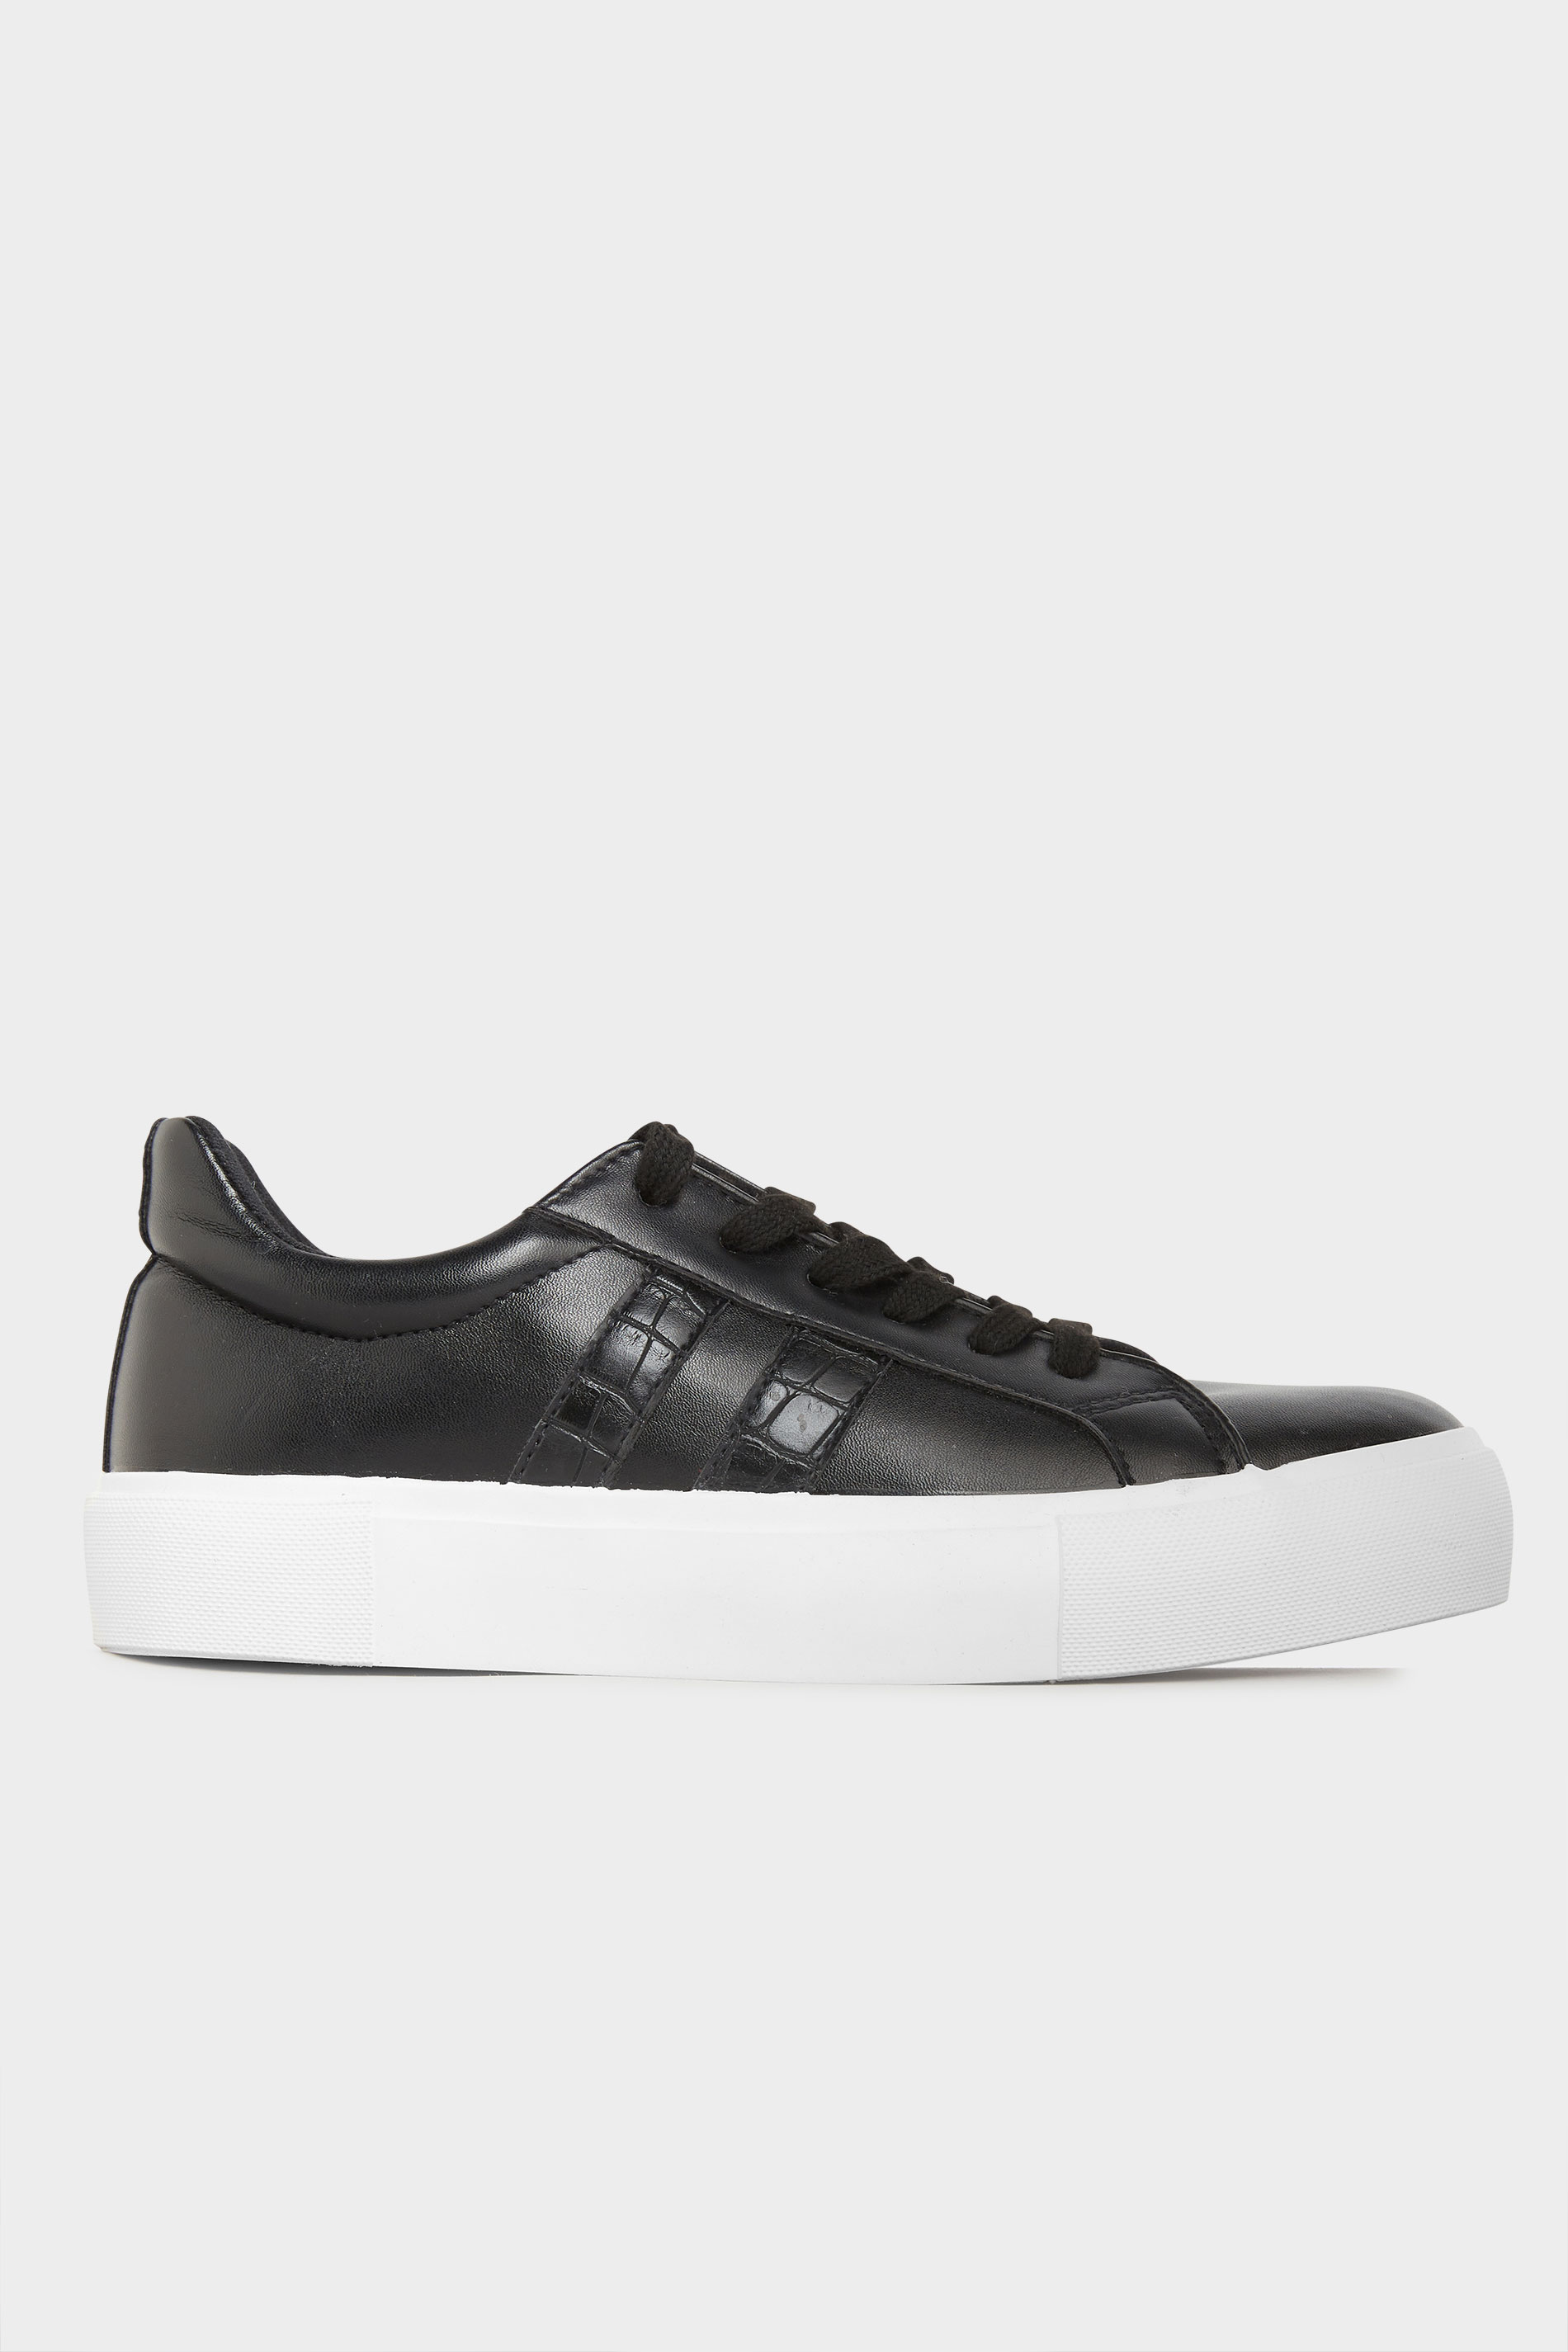 LIMITED COLLECTION Black Platform Stripe Trainers In Wide Fit | Yours ...